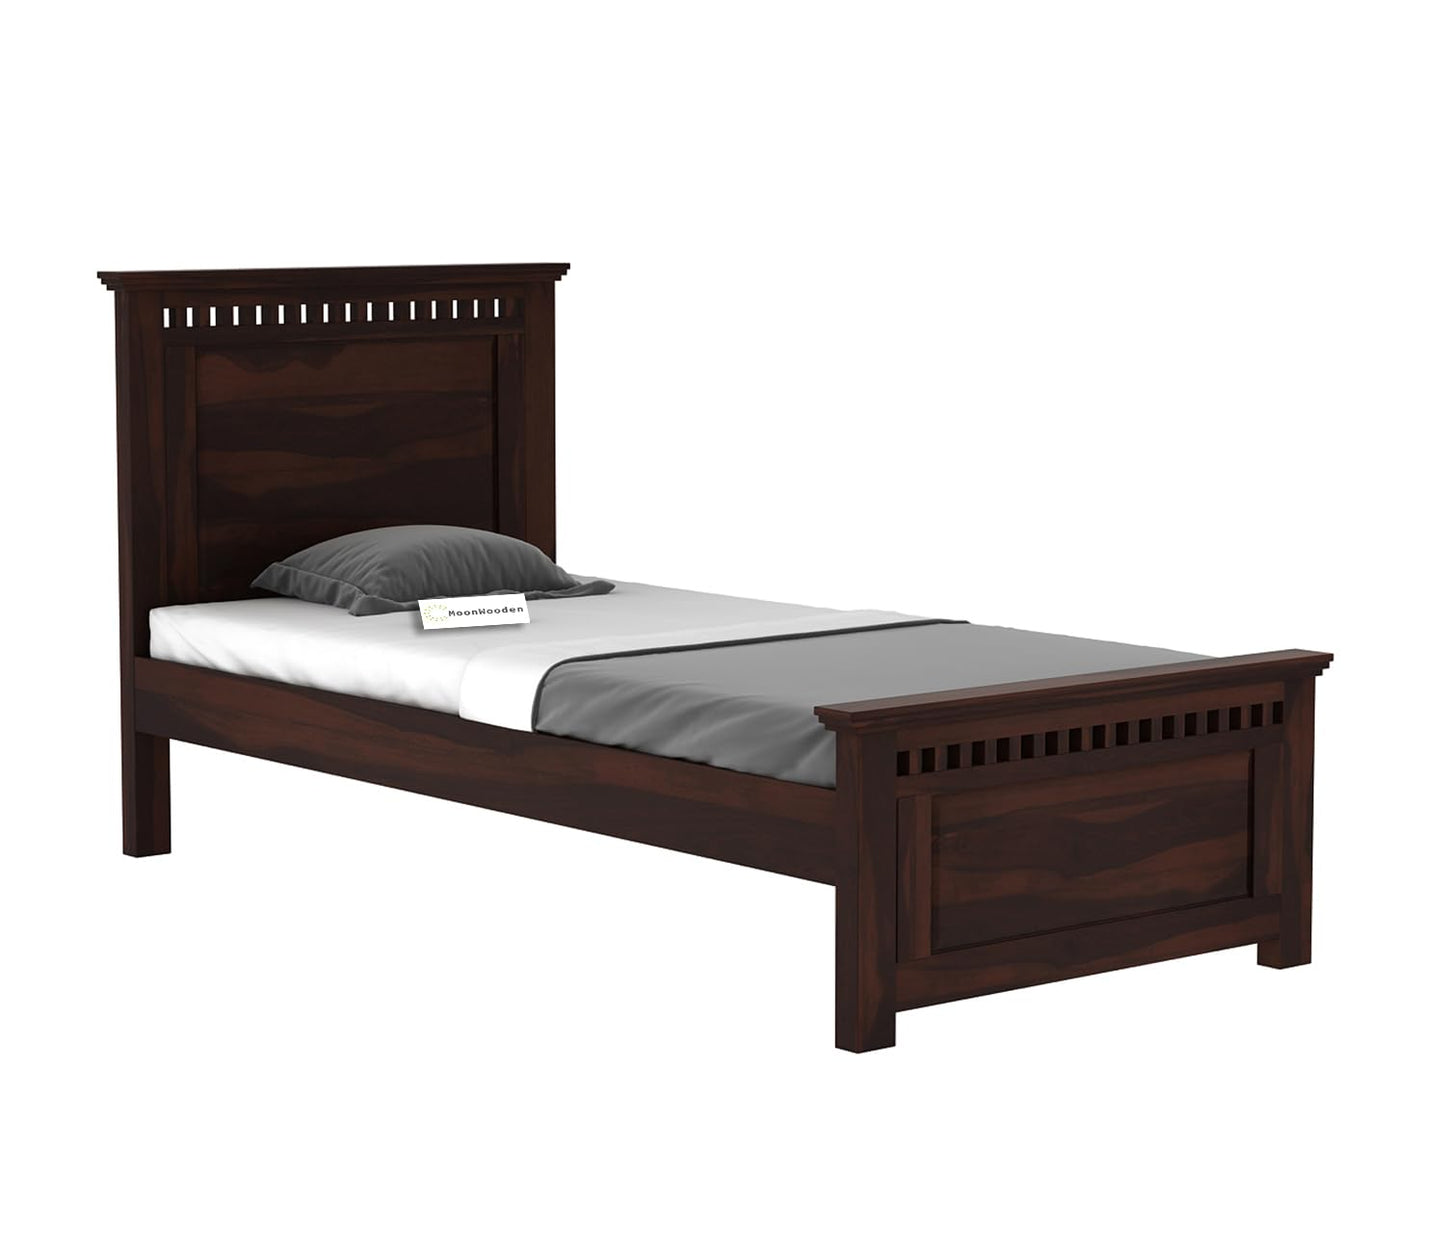 MoonWooden Sheesham Wood Single Size Bed Without Storage for Bedroom Living Room Home Wooden Palang for Hotel (Walnut Finish)